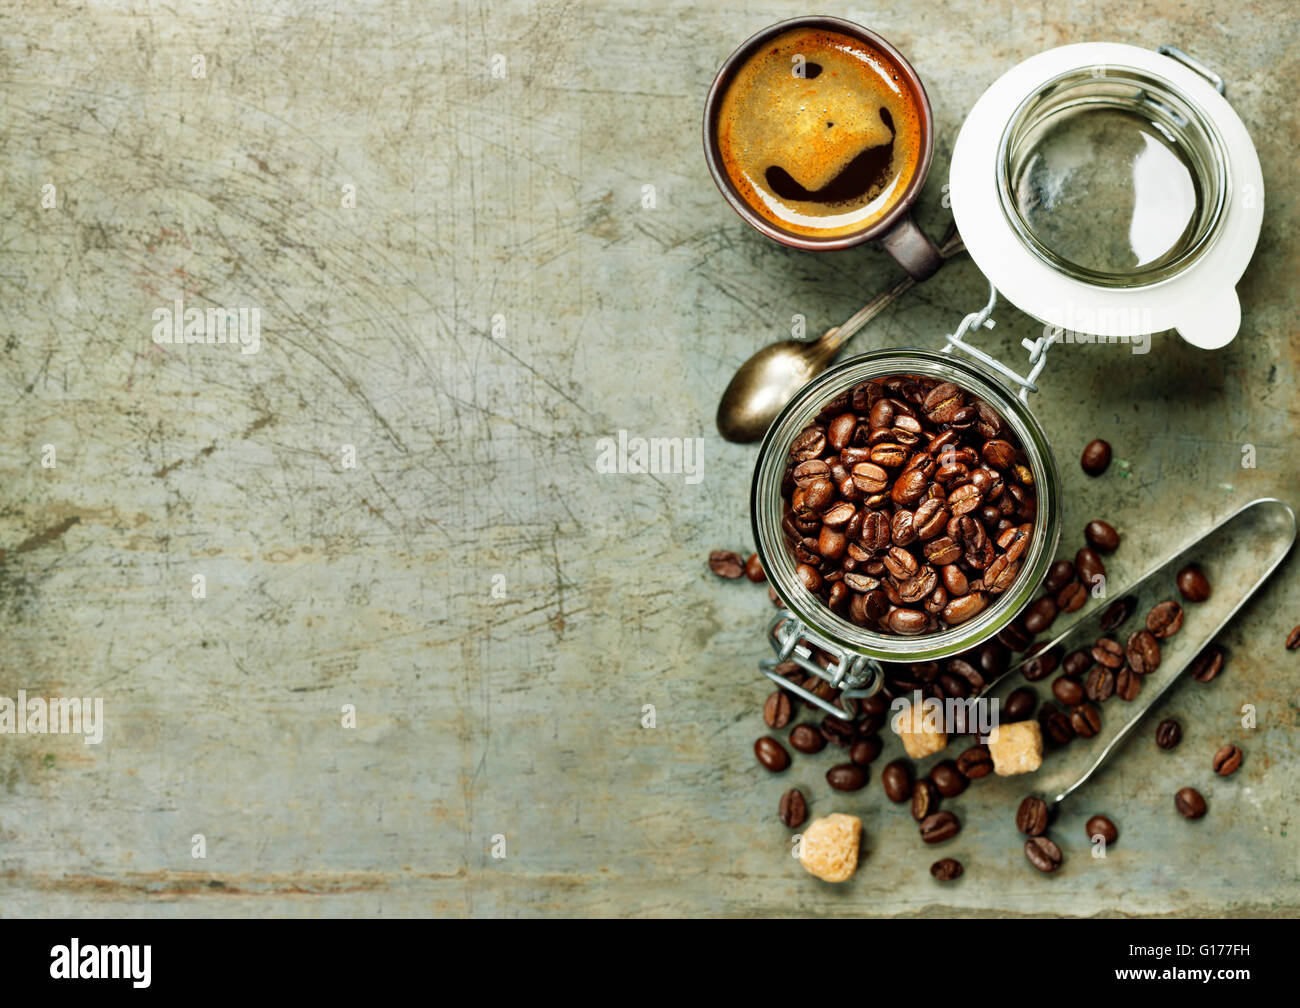 Espresso and coffee beans on vintage background Stock Photo